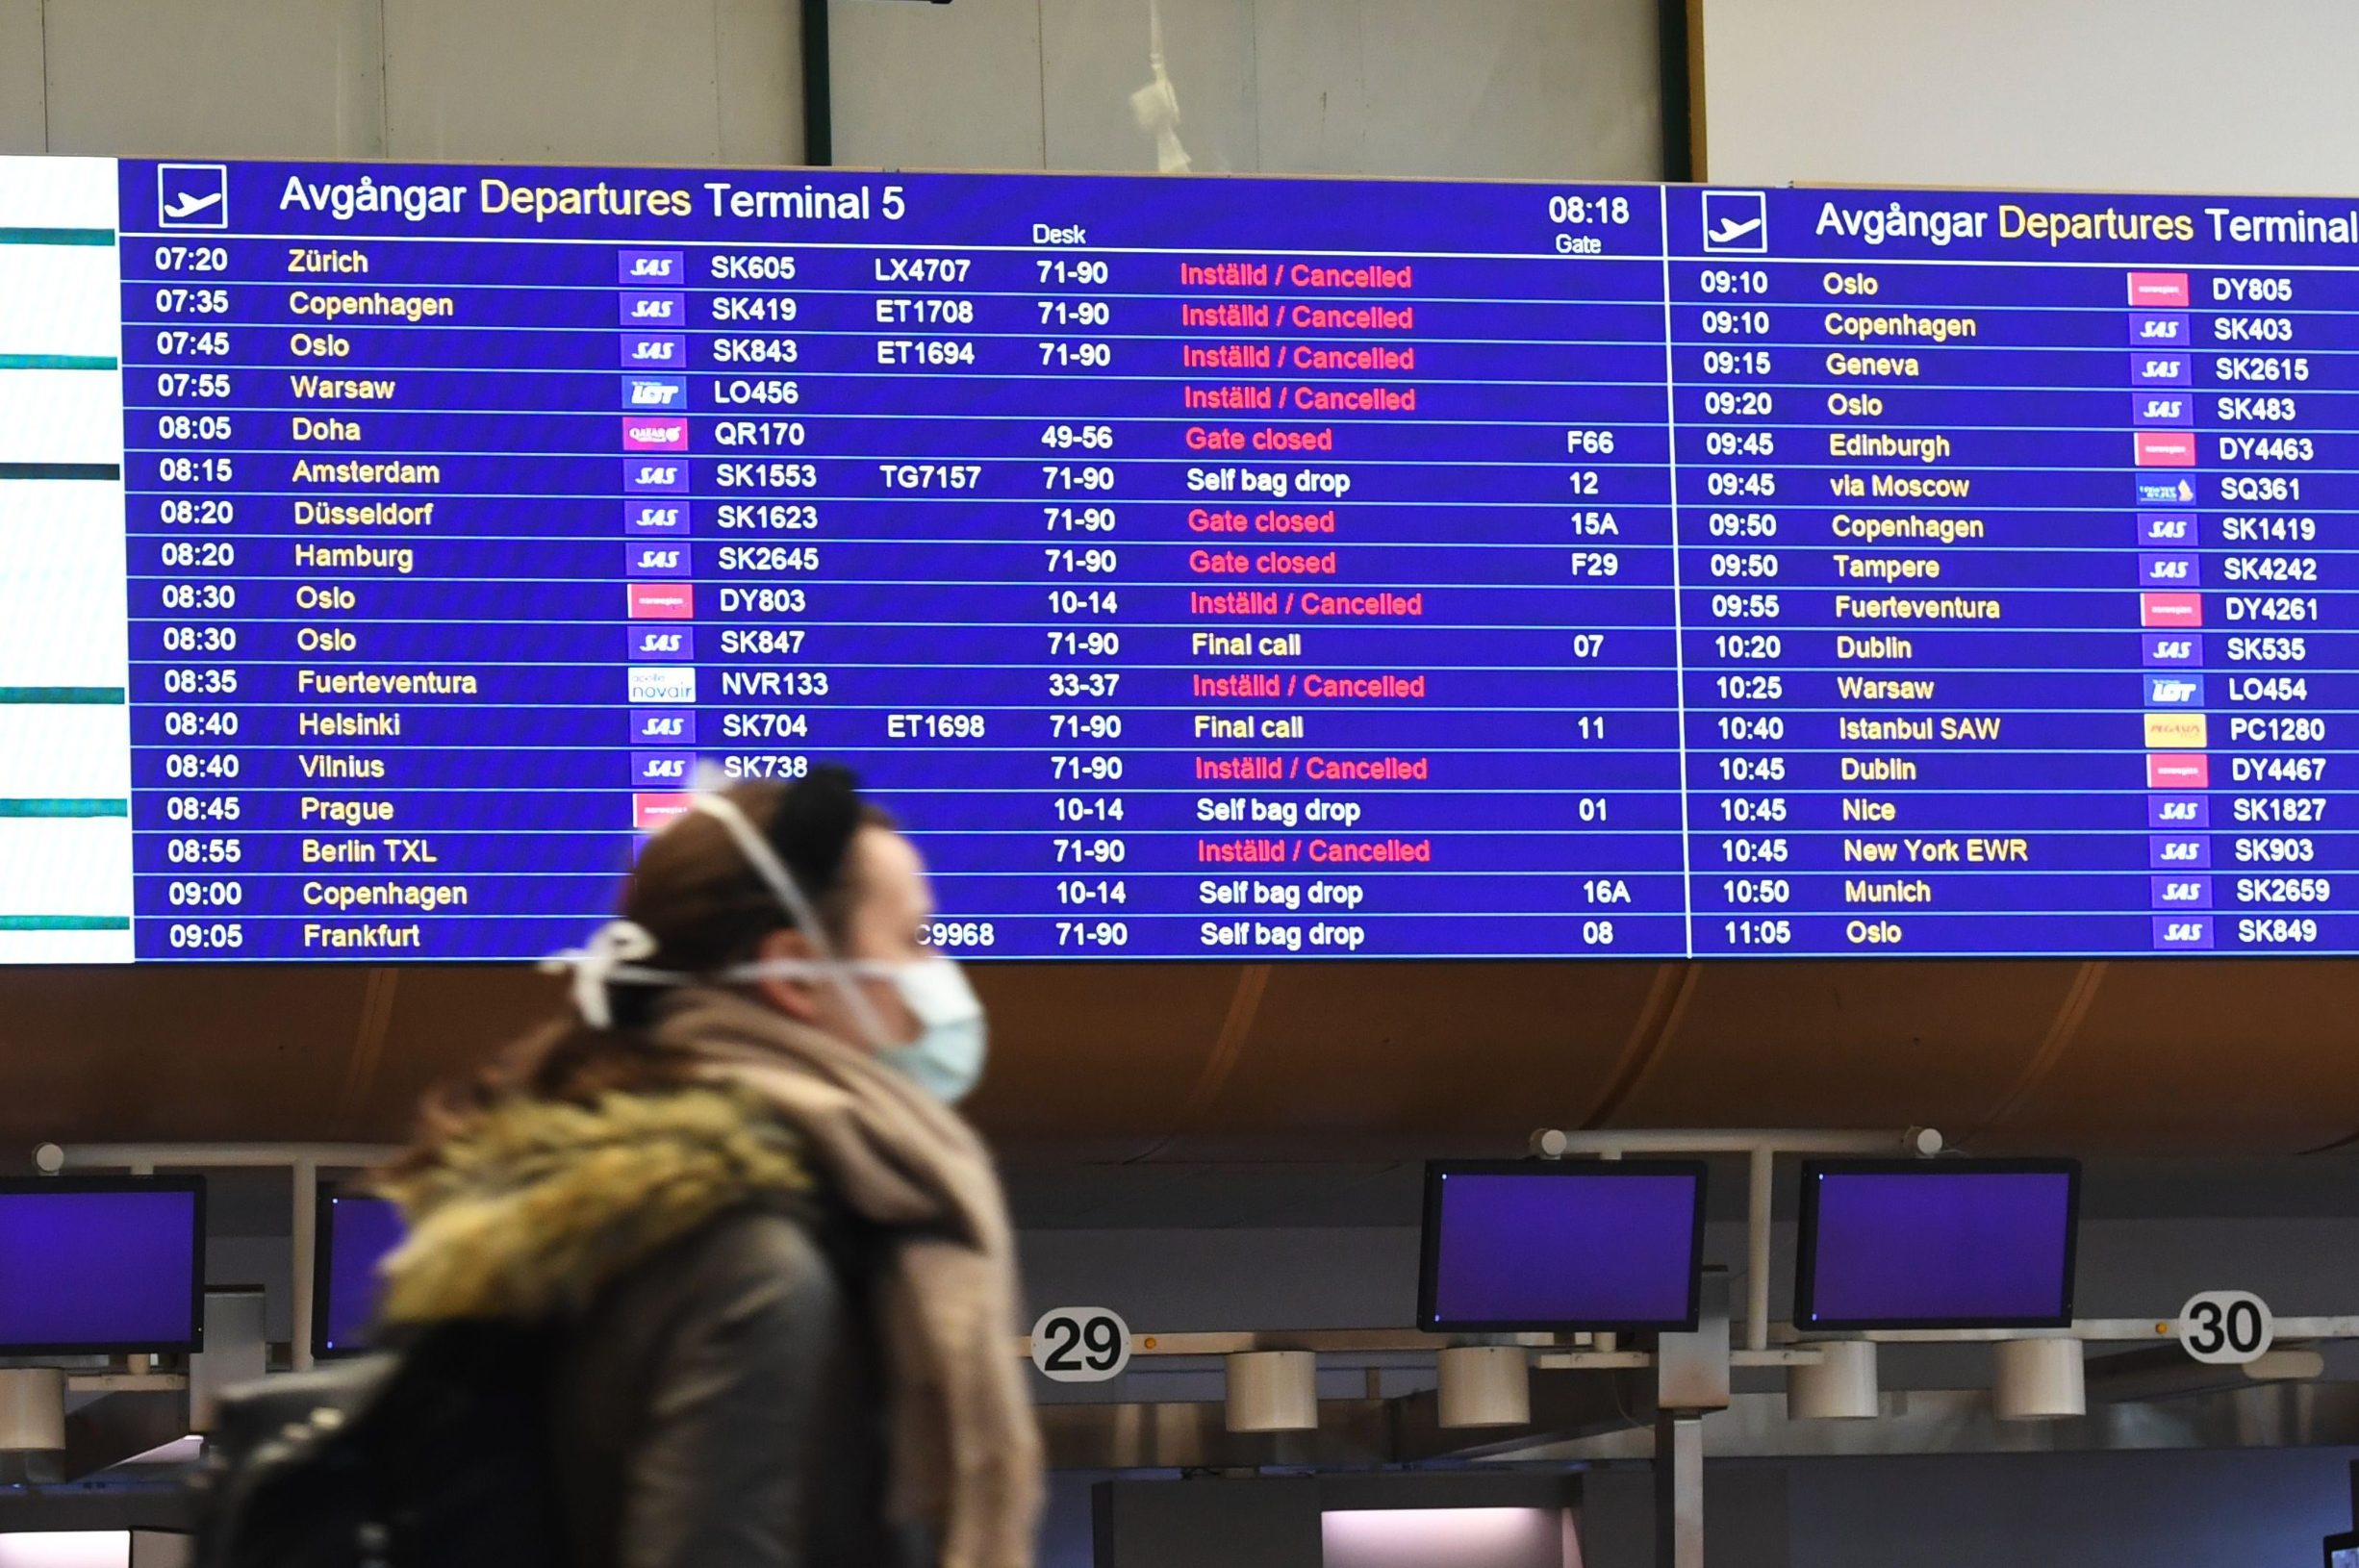 A passenger walks past an information board announcing flight cancellations at Arlanda international airport outside Stockholm, with the airport being unusually empty due to concerns over the spread of the novel coronavirus on March 16, 2020. (Photo by Fredrik SANDBERG / TT NEWS AGENCY / AFP) / Sweden OUT